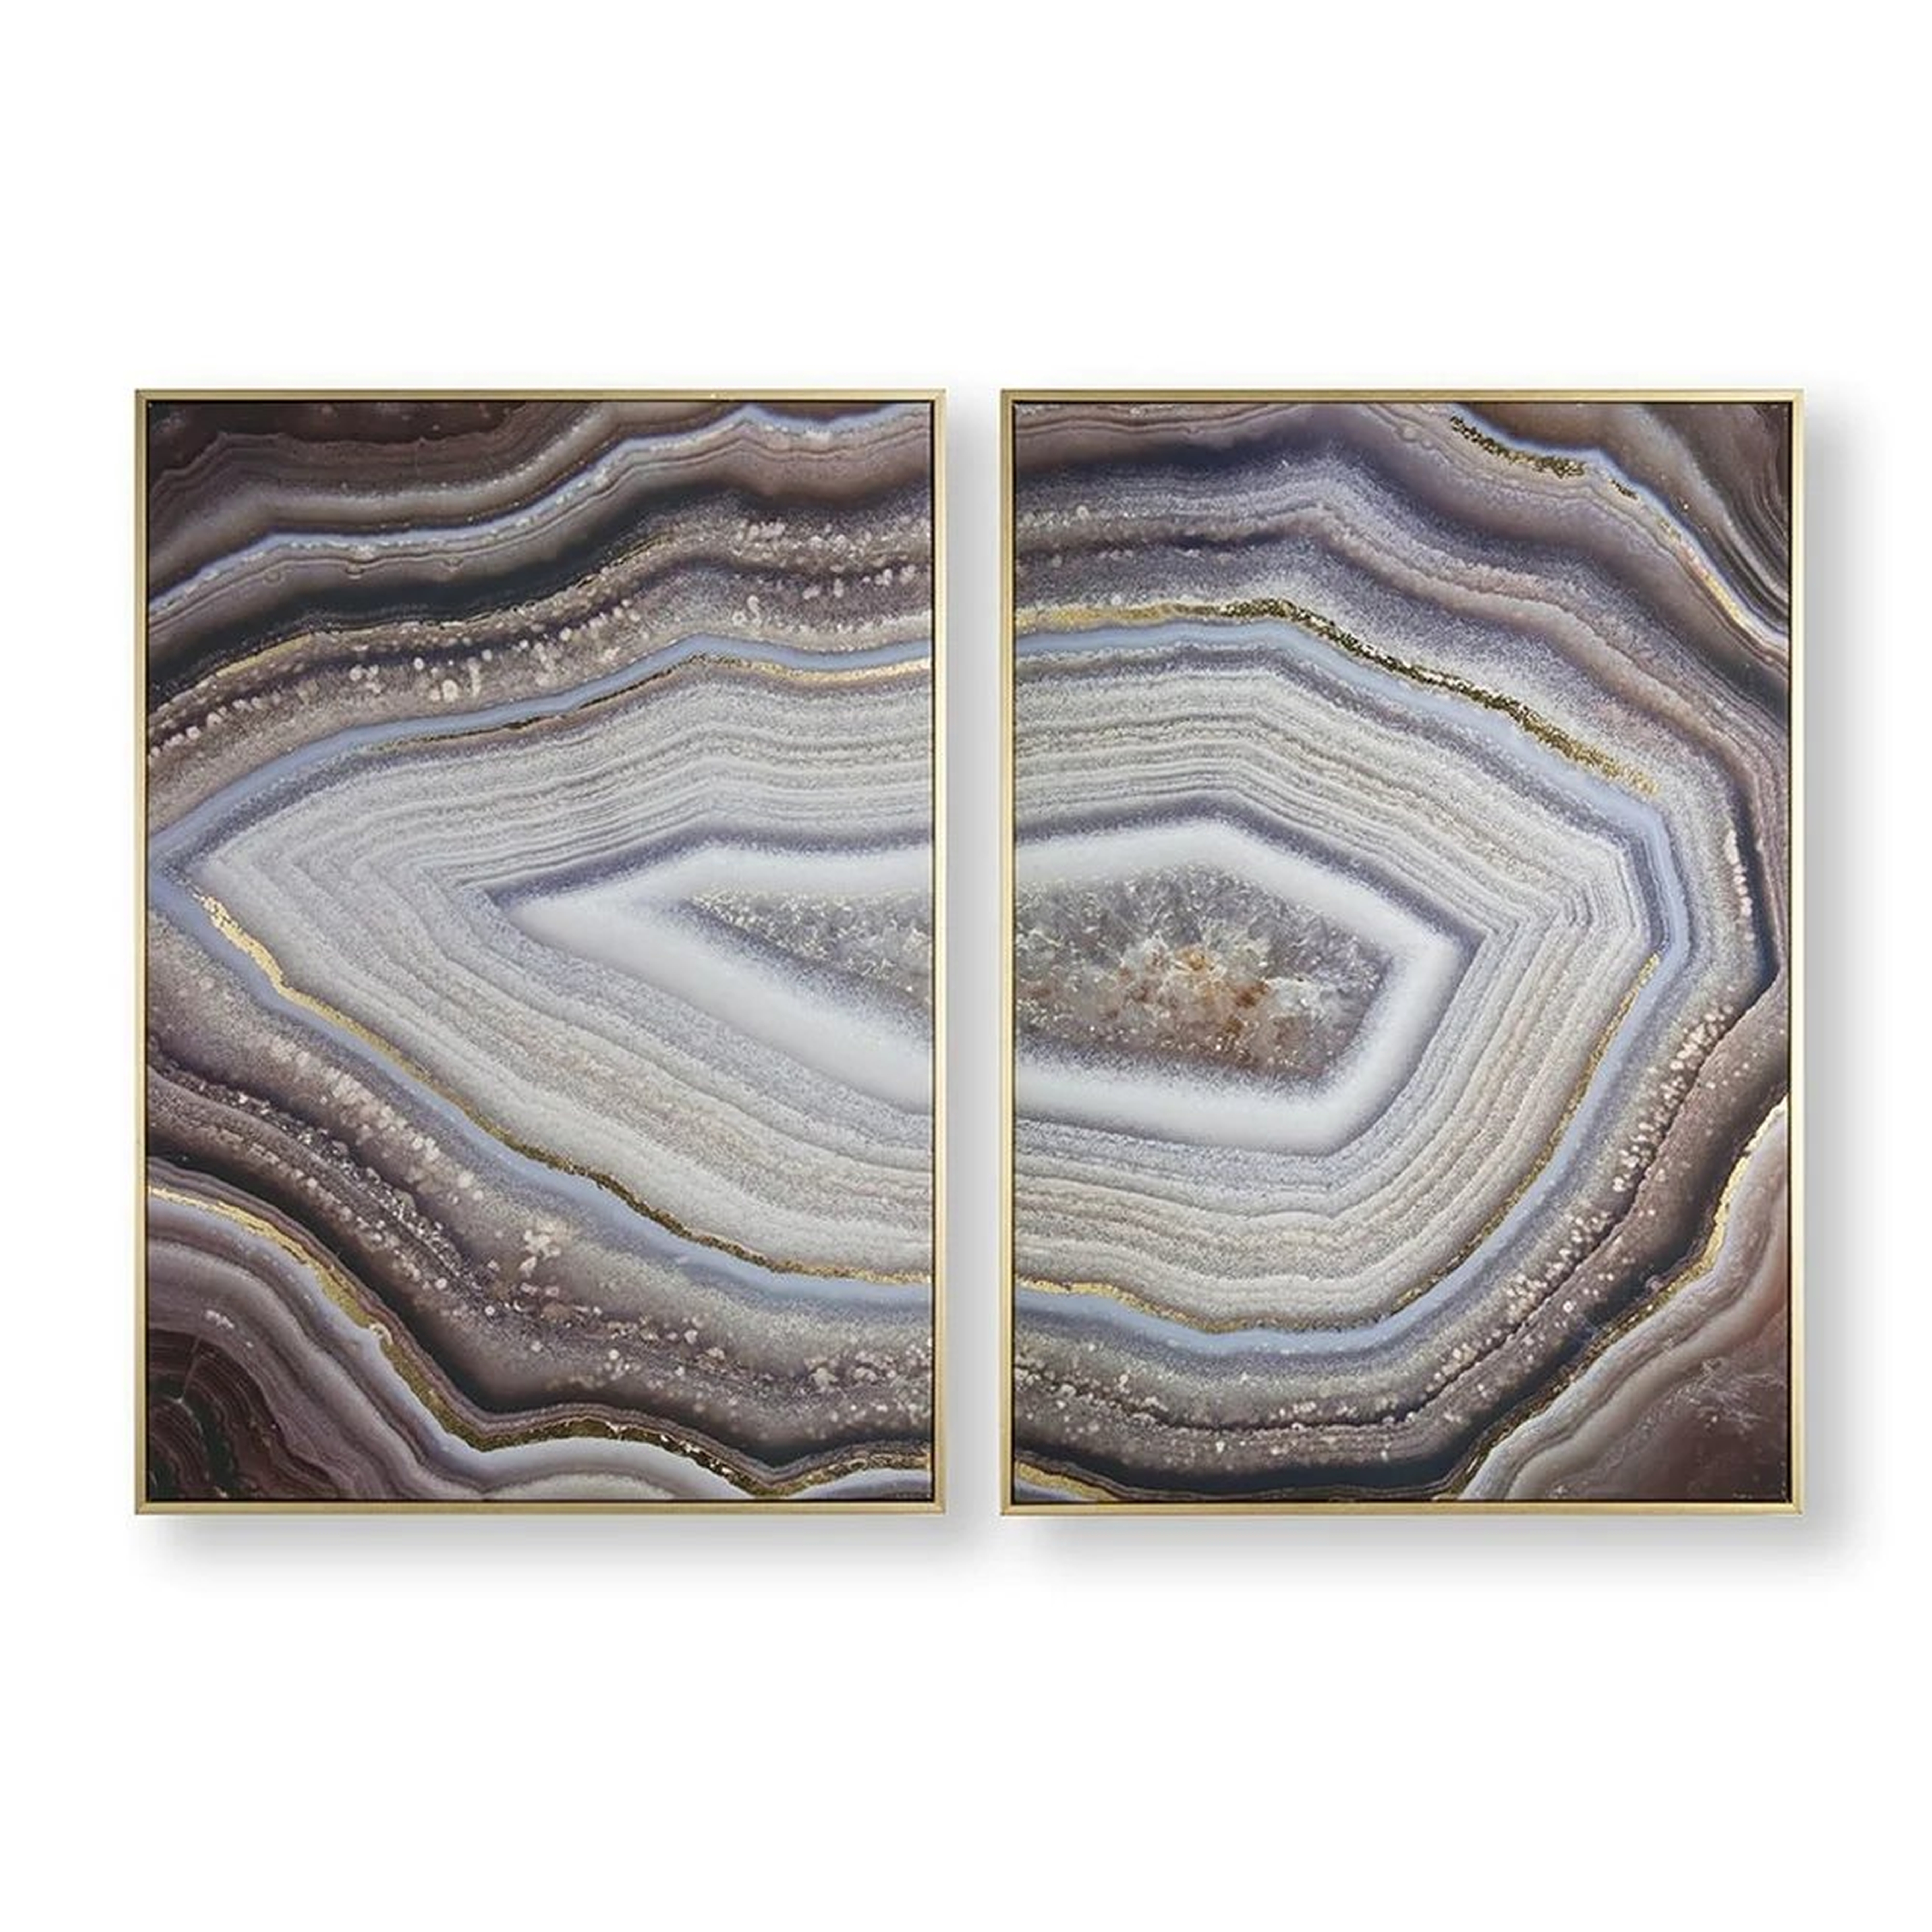 Glamorous Gems Framed Canvas Wall Art Set of 2 - Grey/Charcoal - Overstock